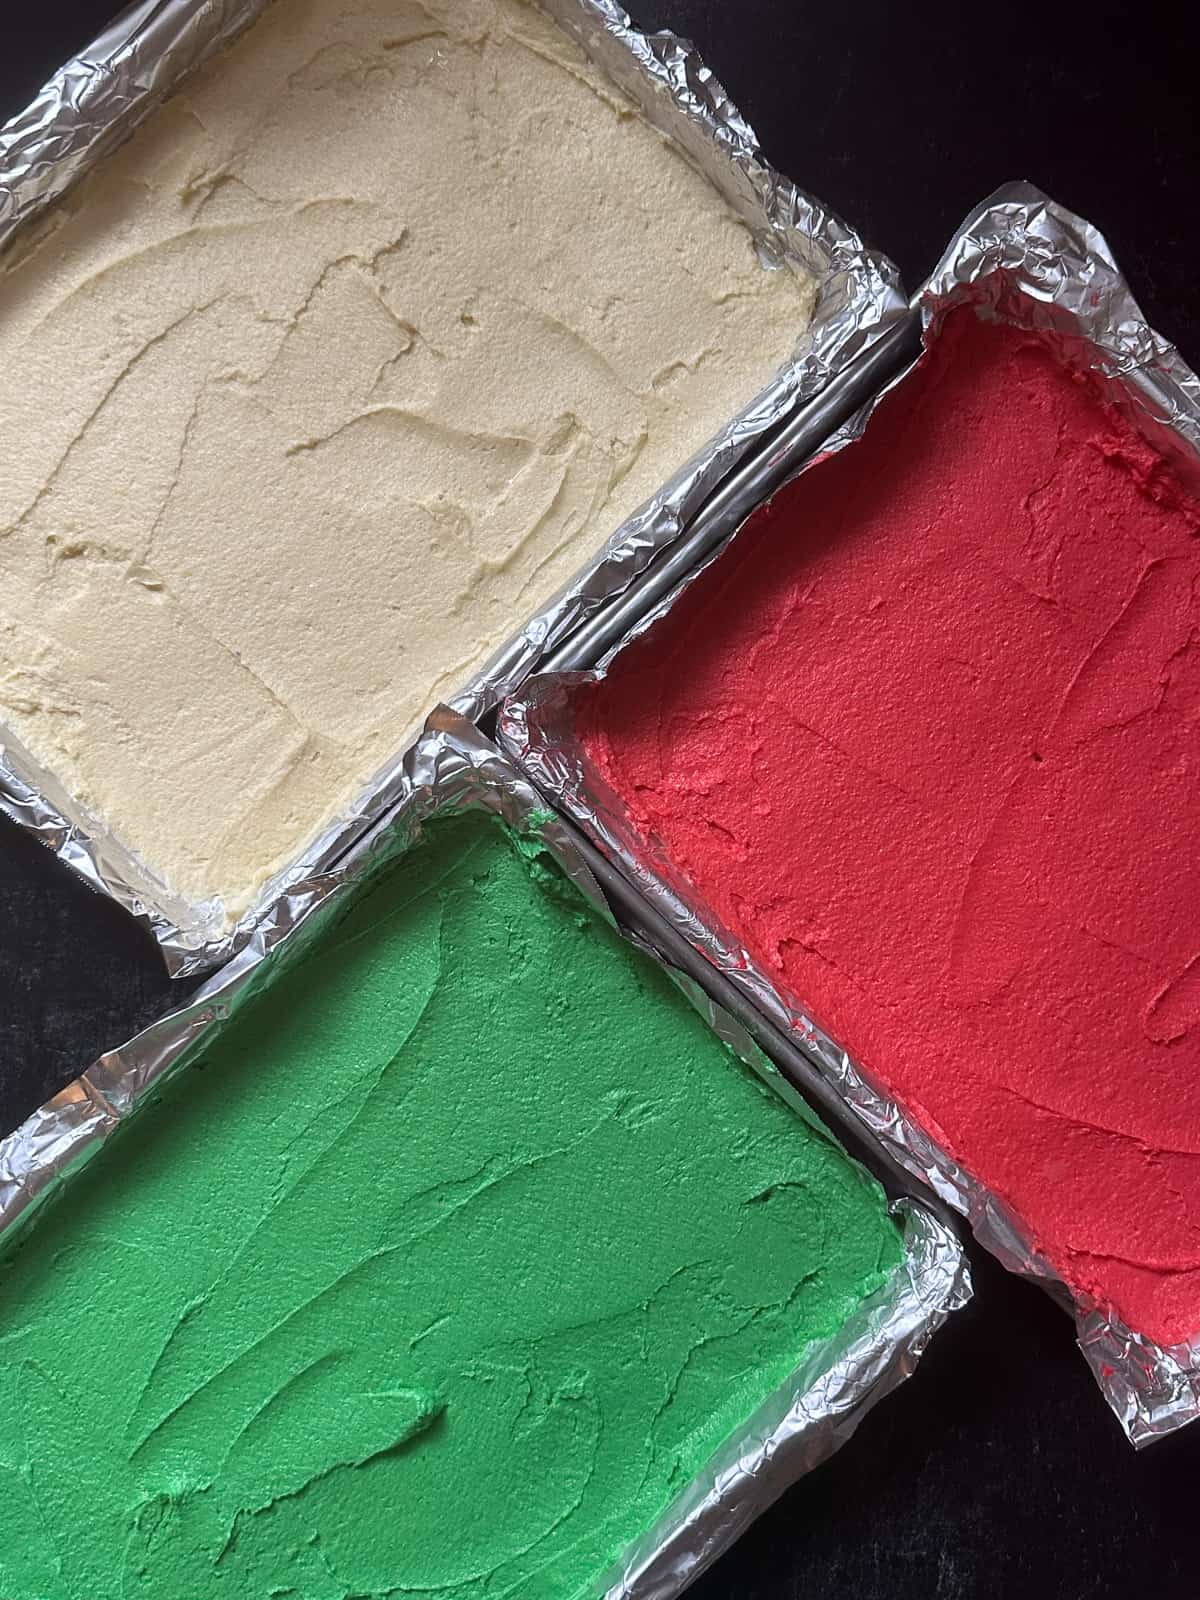 The three unbaked cake layers in red, white and green.